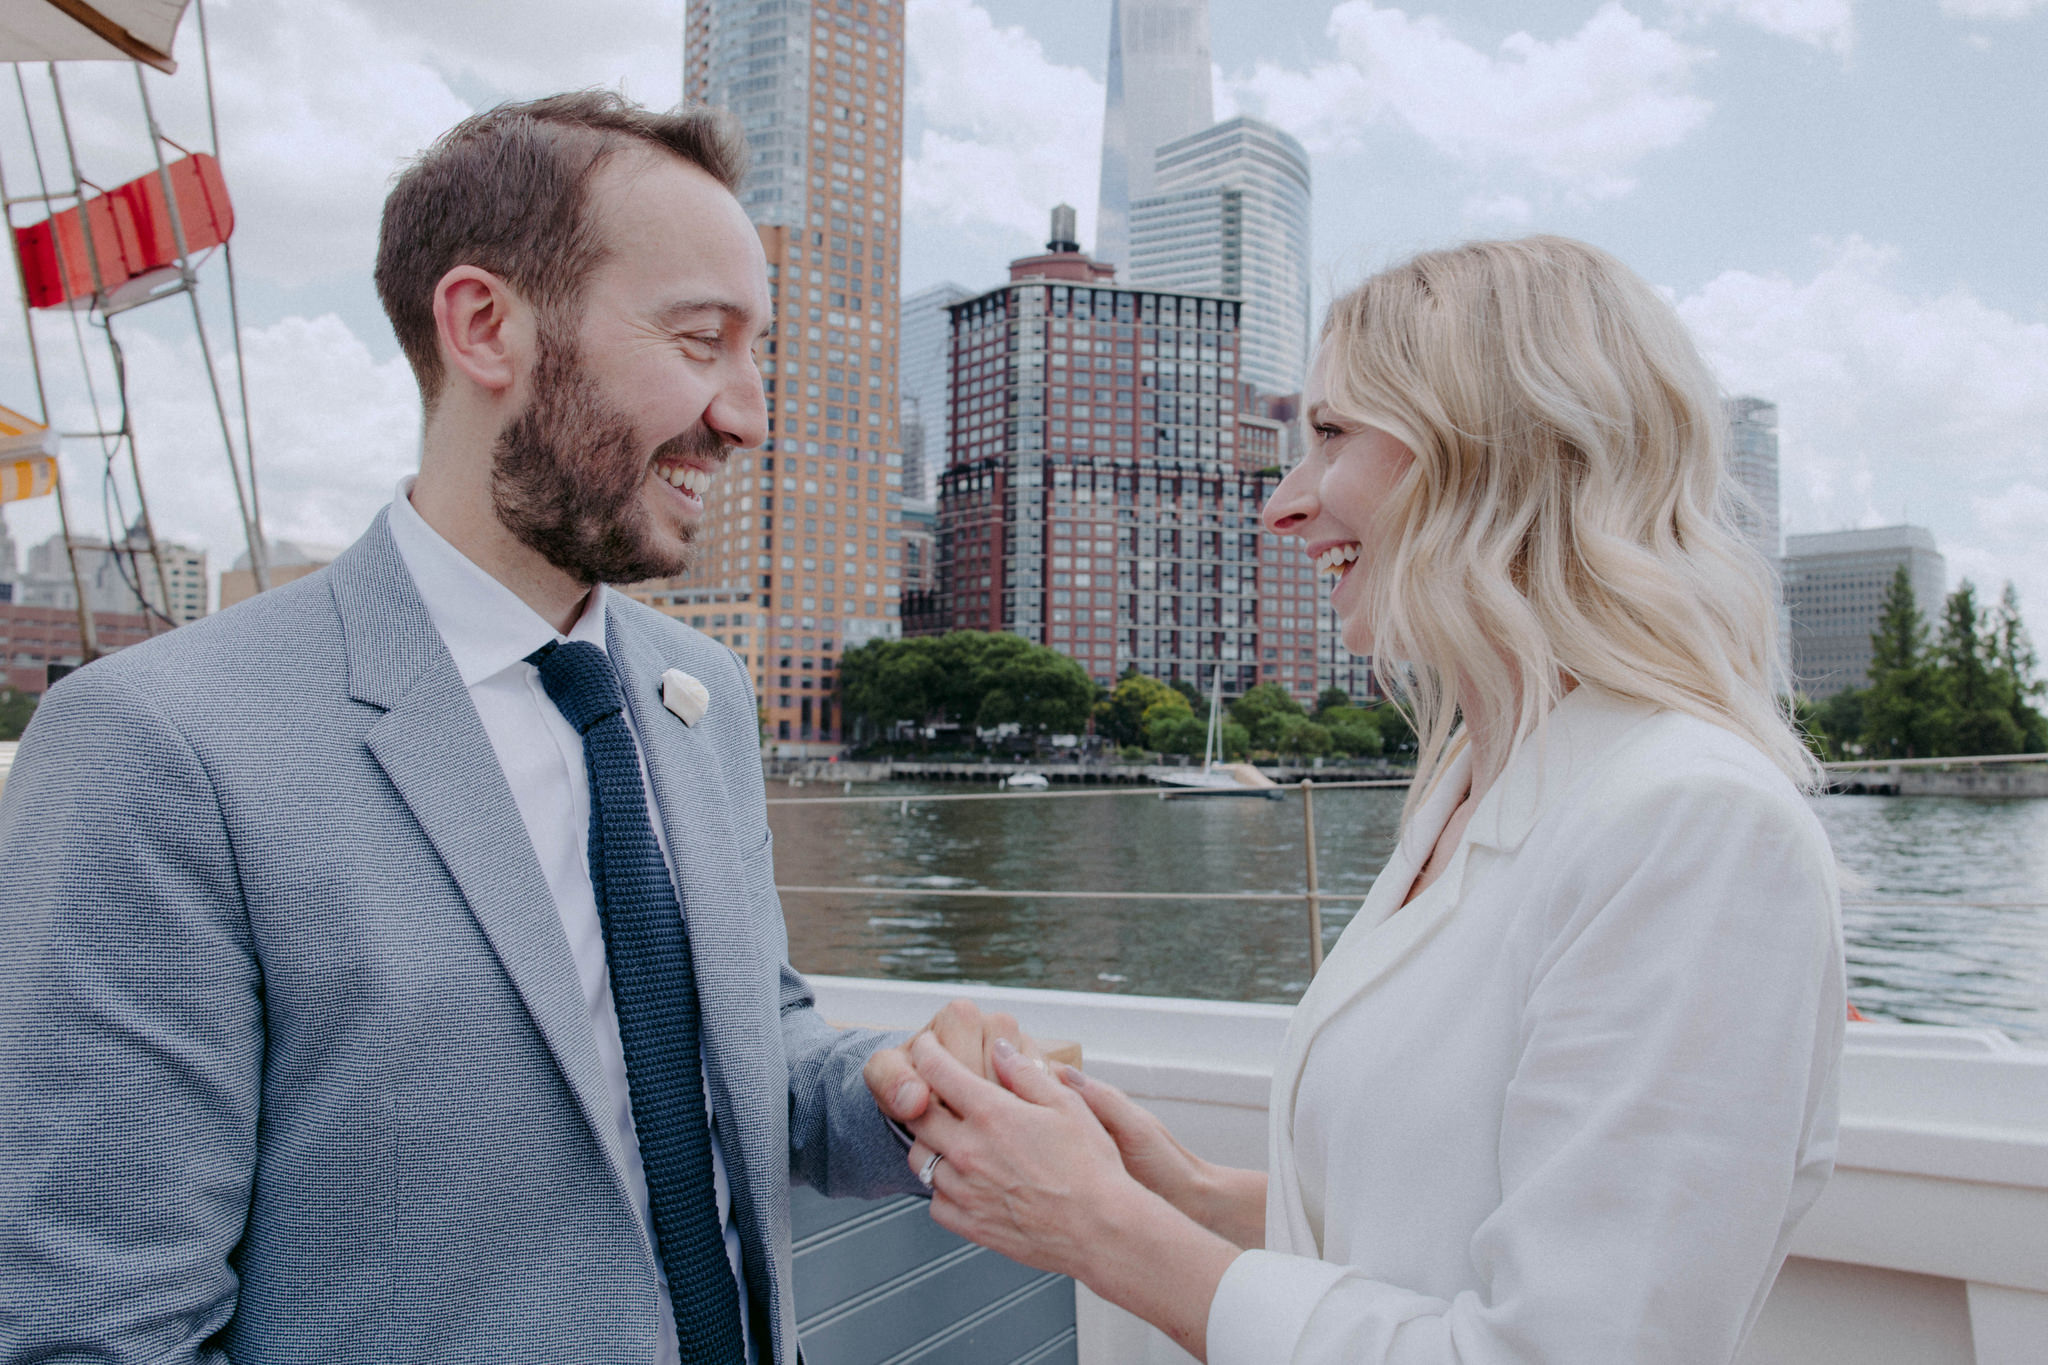 The Bride is holding the groom's hand while smiling at each other in a boat at New York. Intimate wedding image by Jenny Fu Studio